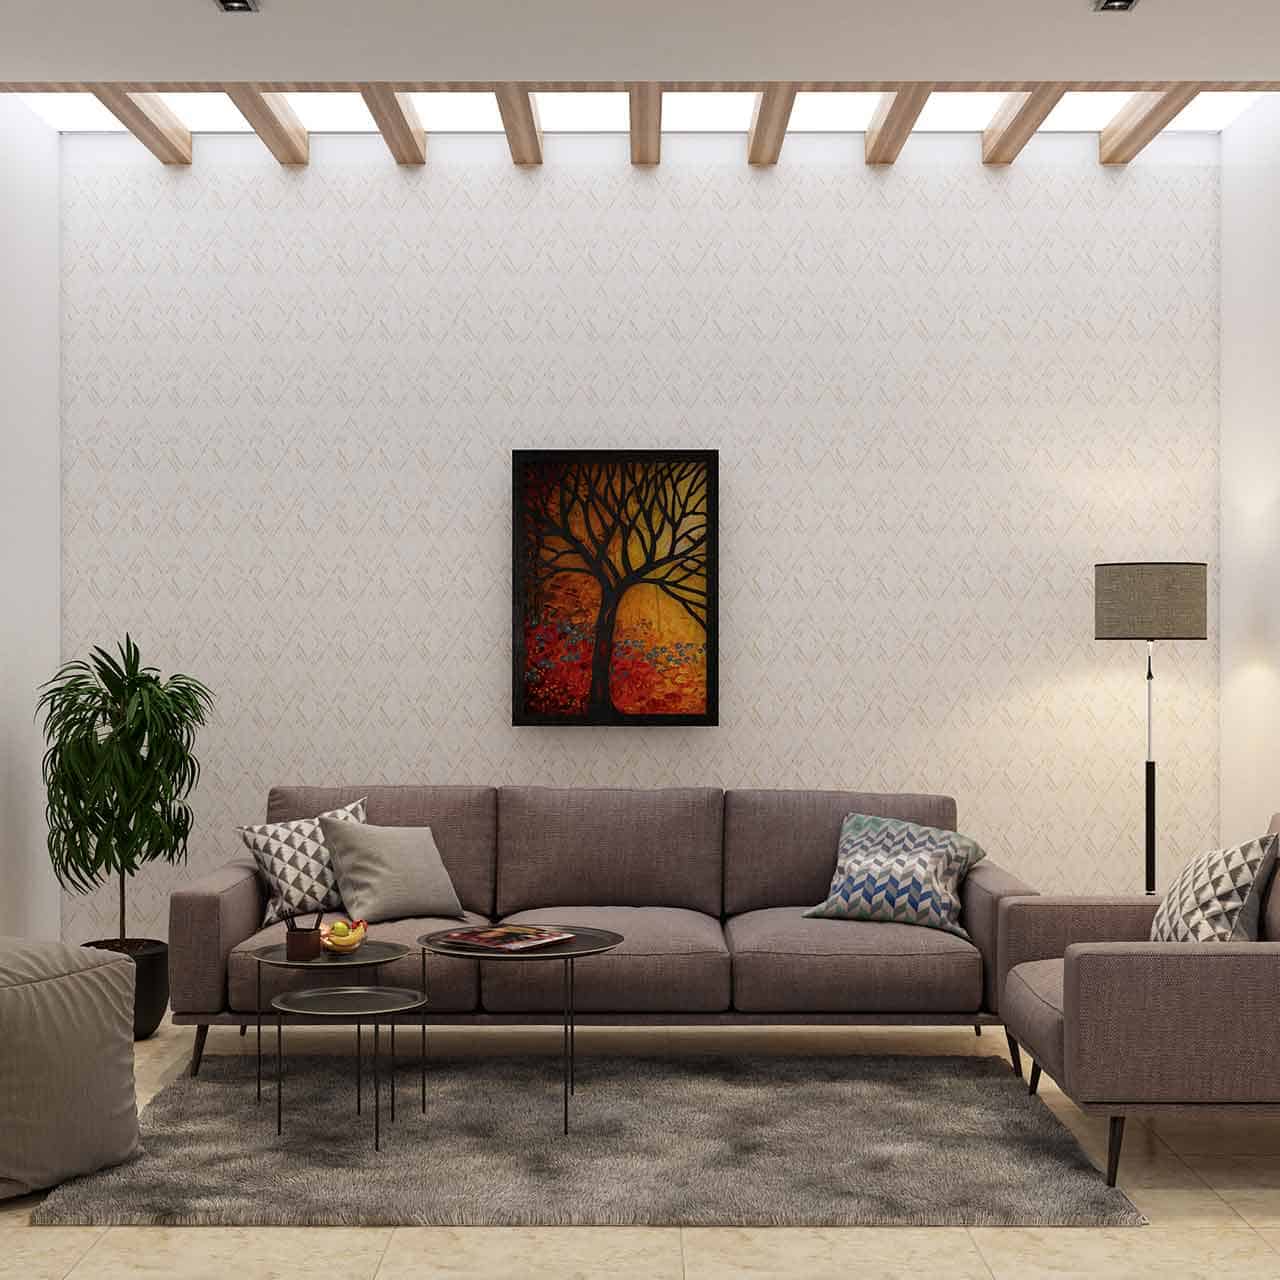 SIMPLE STYLE LIVING ROOM-2